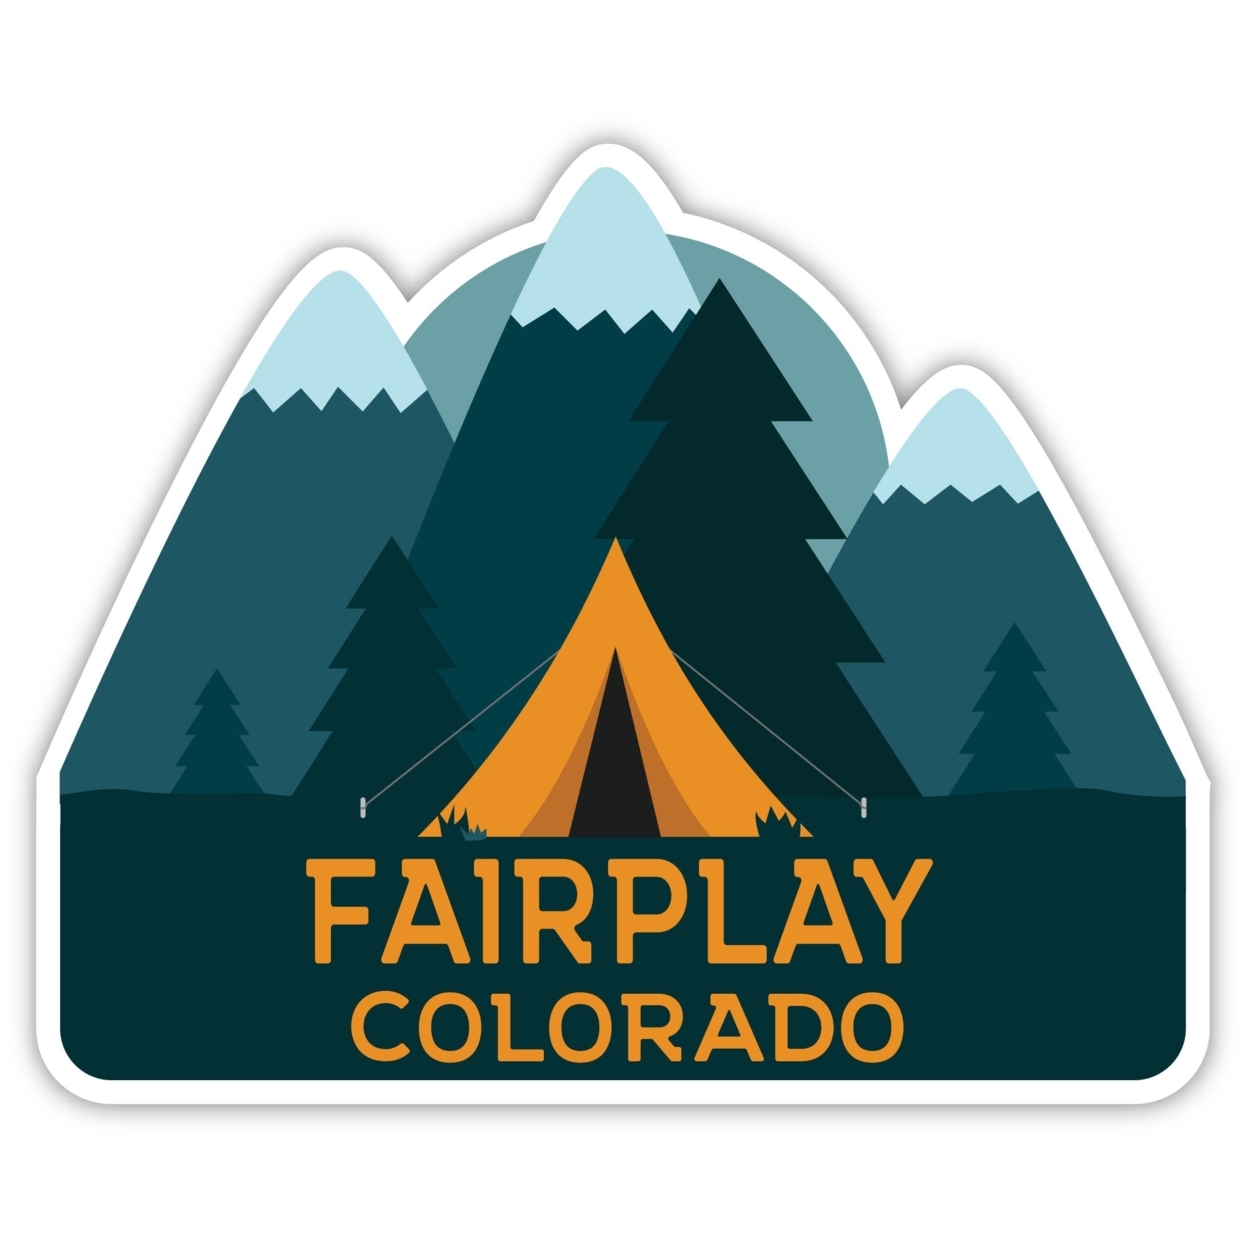 Fairplay Colorado Souvenir Decorative Stickers (Choose Theme And Size) - 4-Pack, 4-Inch, Camp Life